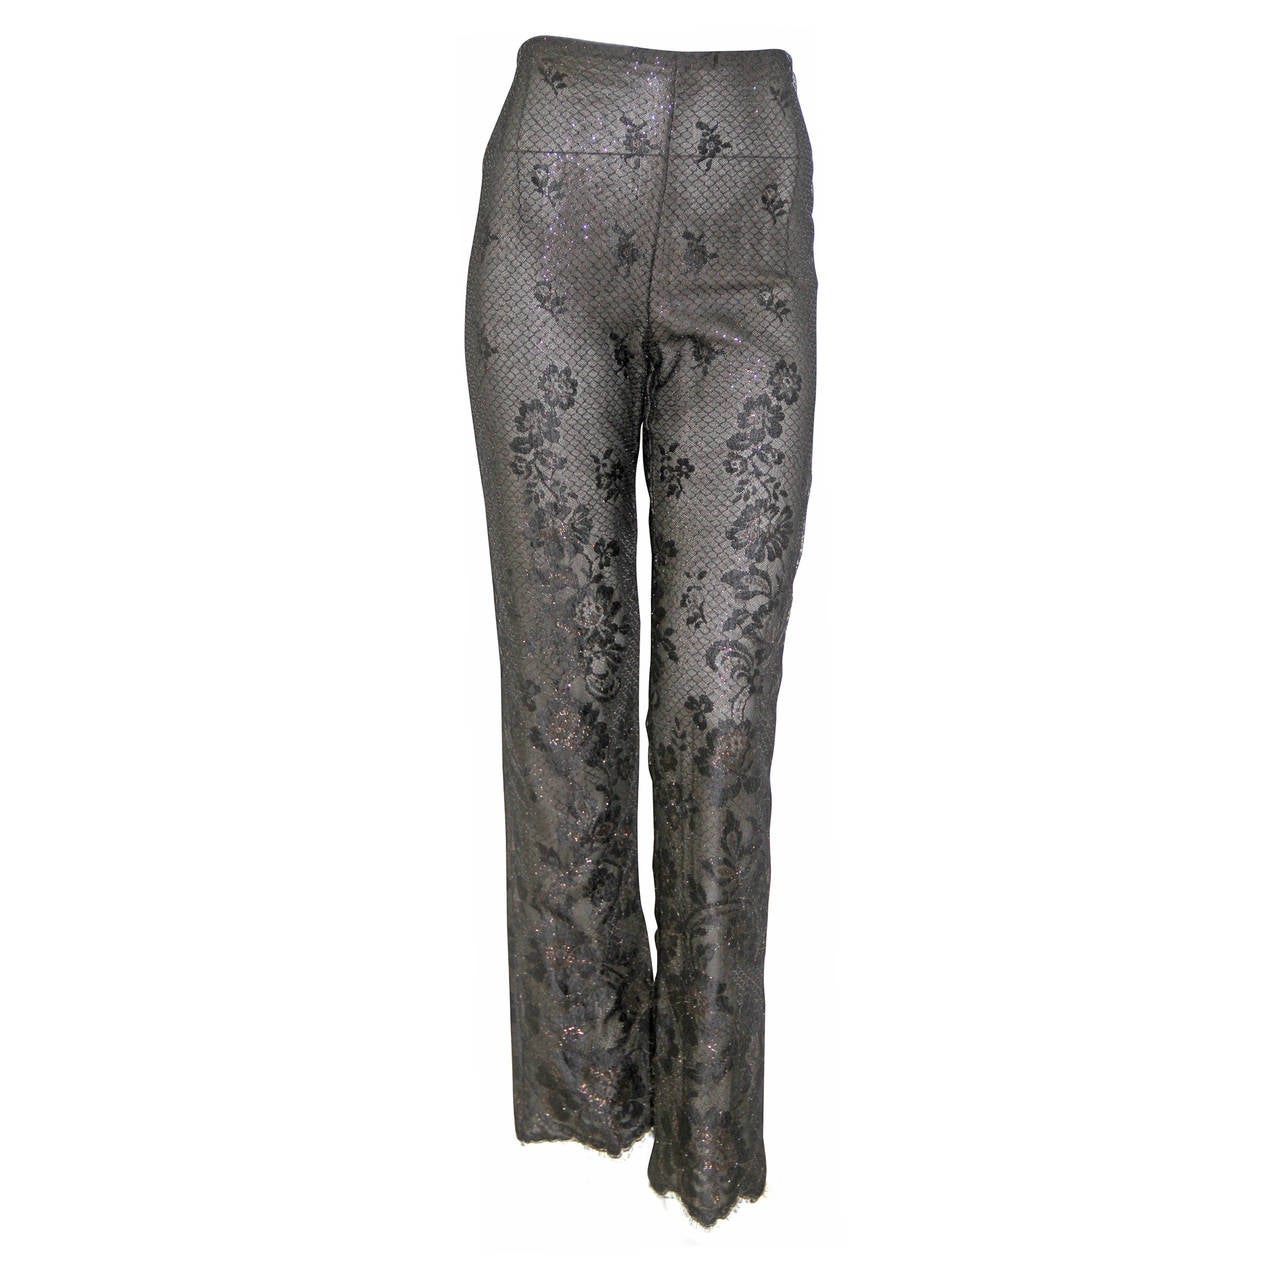 Atelier Versace Punk Metal Lace Thread Pants Fall 1993 For Sale